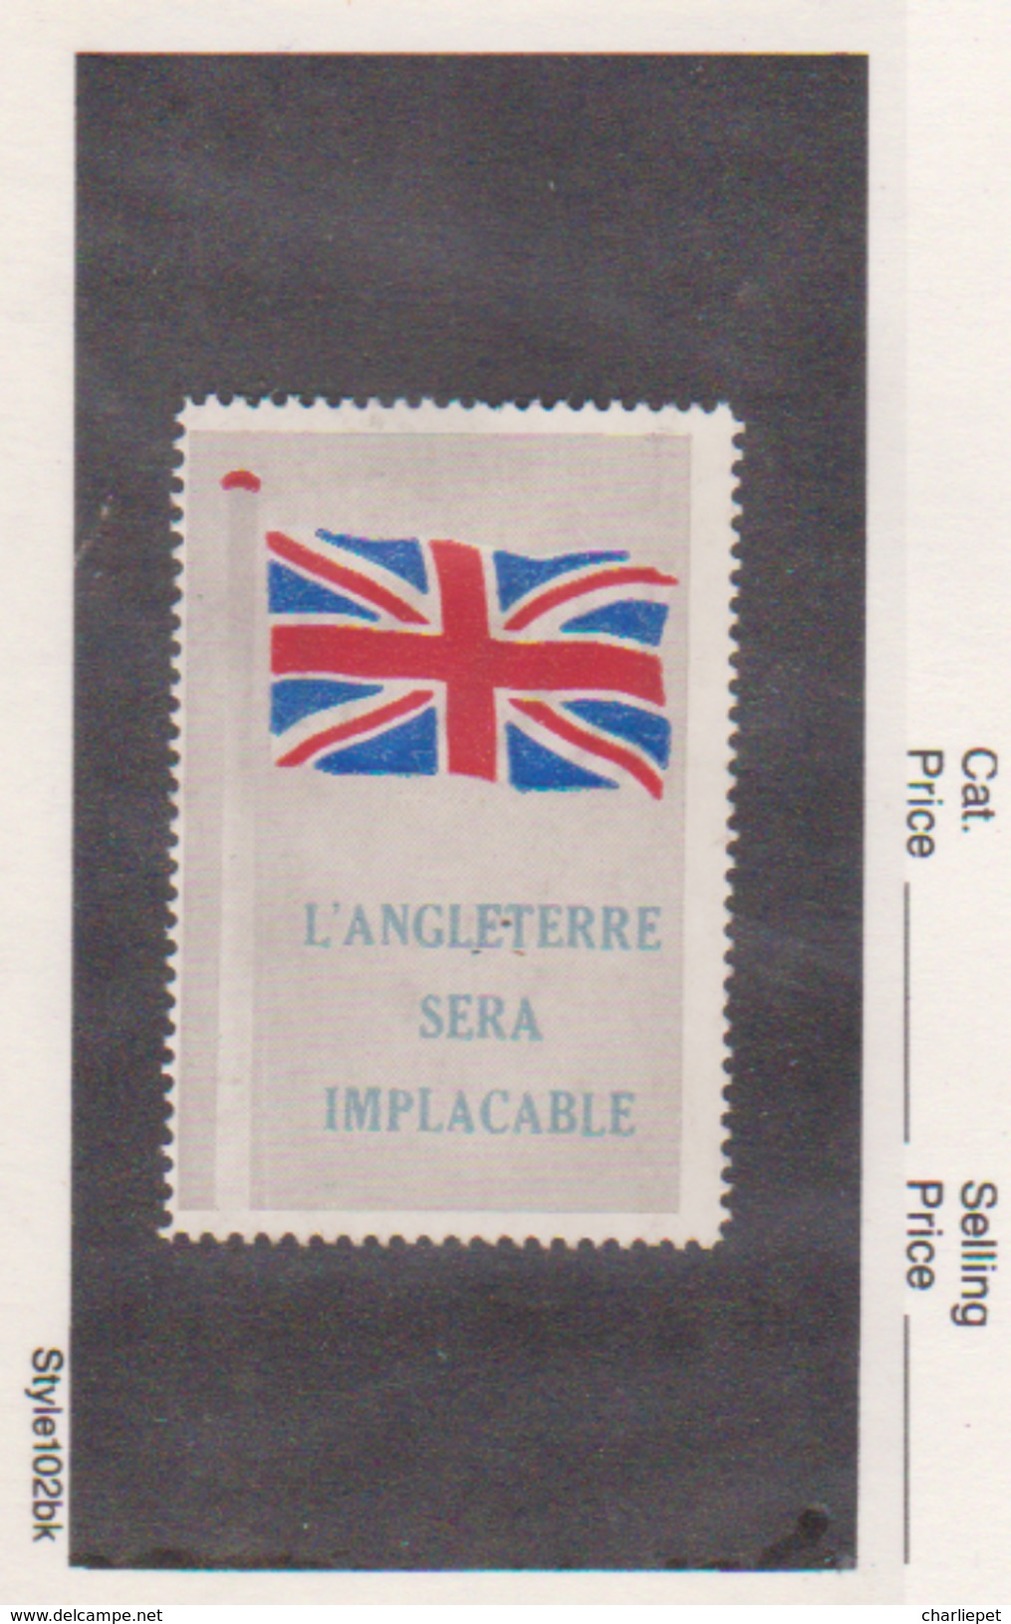 France WWI  British Flags  L'angleterre Sera Implacable Vignette  Military Heritage Poster Stamp - Military Heritage